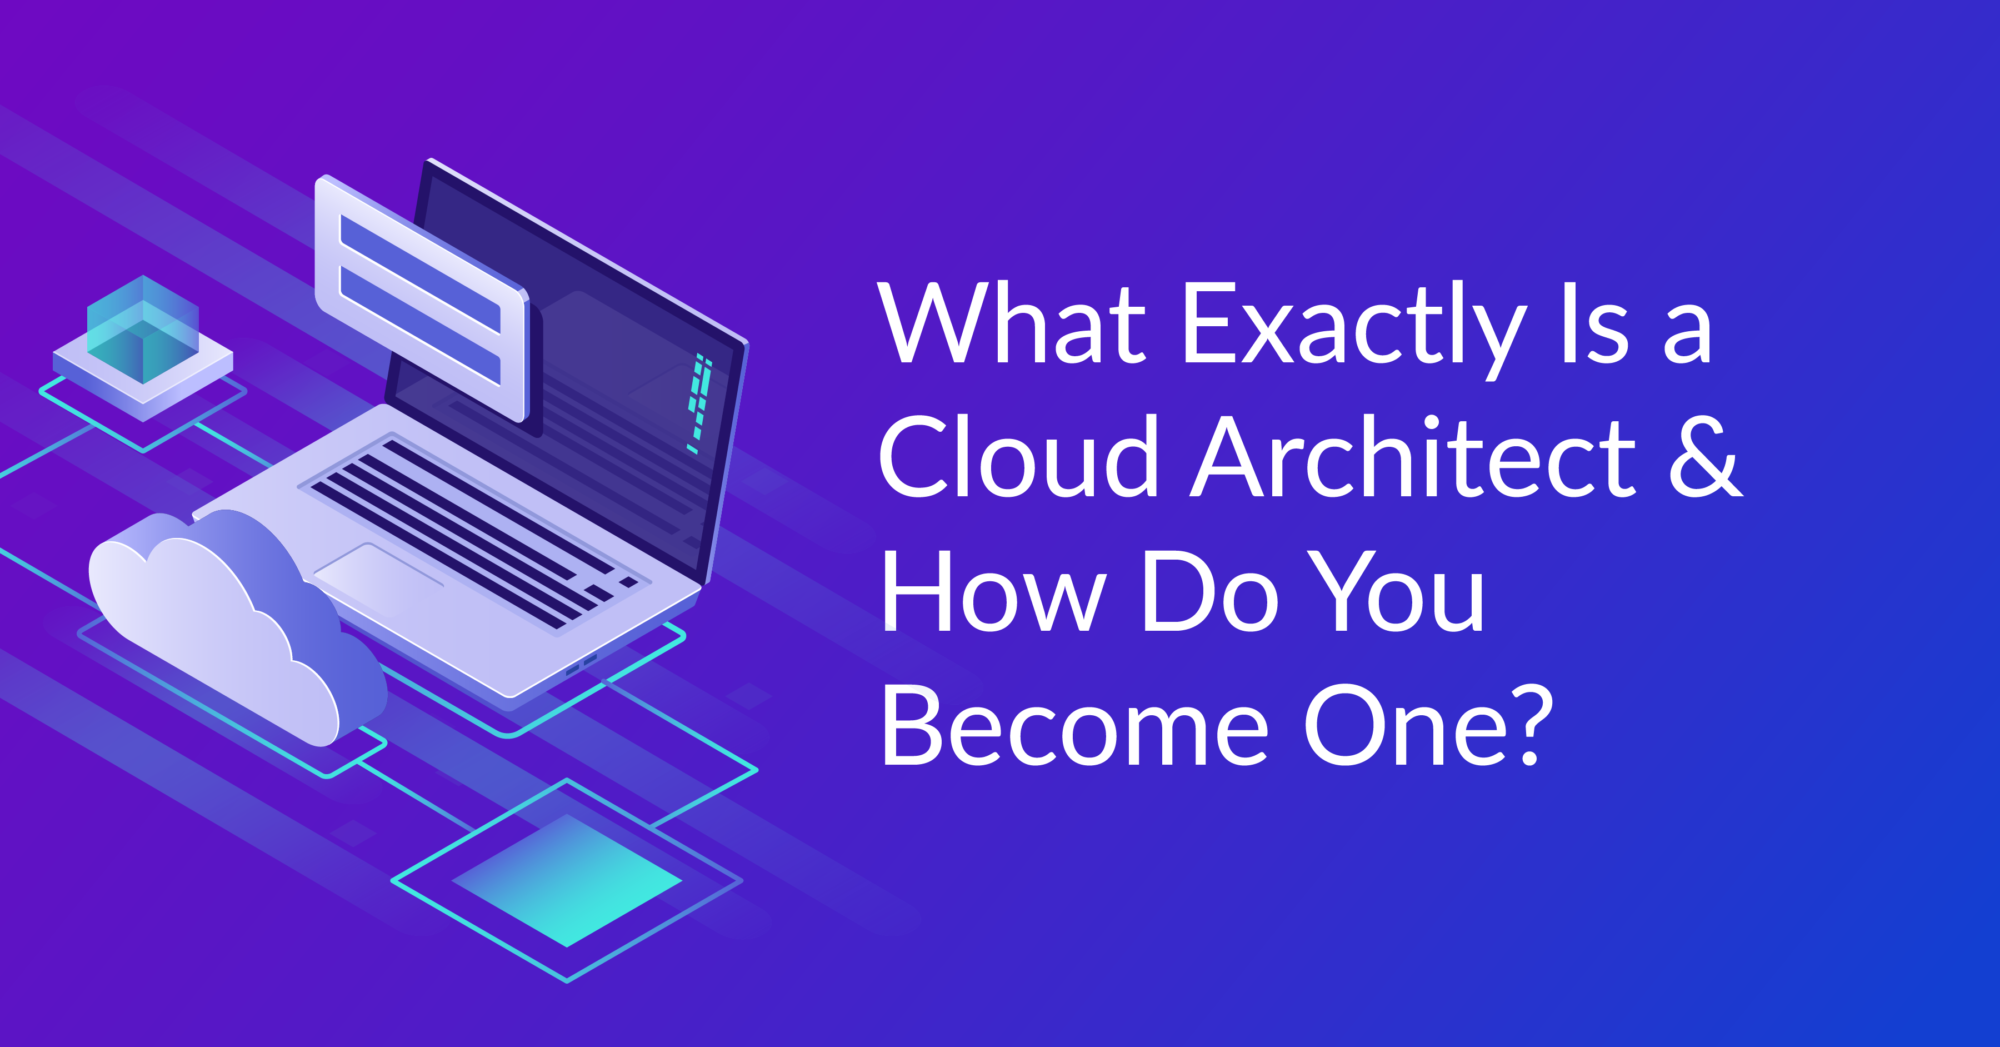 What is a Cloud Architect?